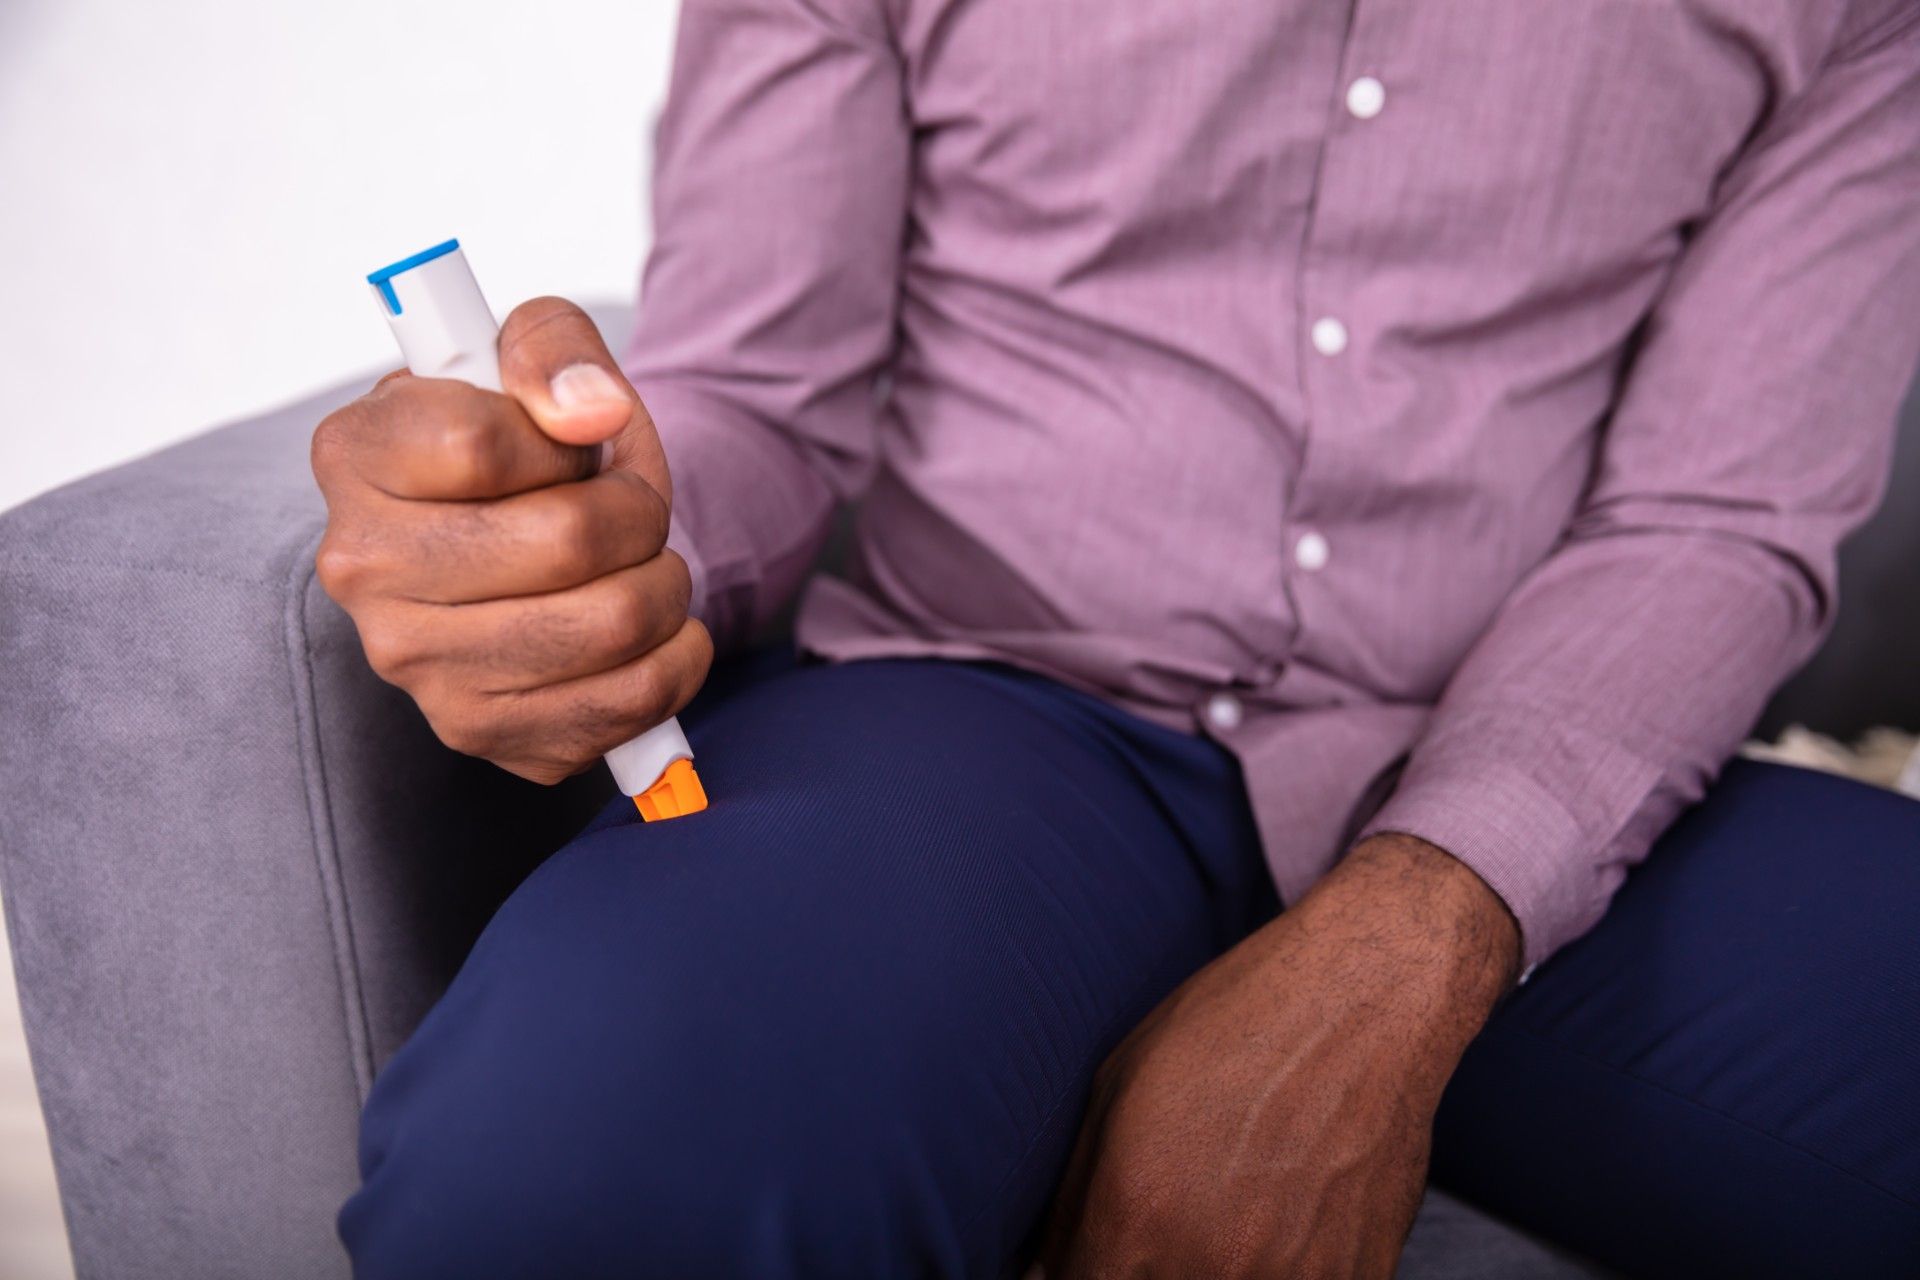 Seated man injecting himself in the thigh using an EpiPen